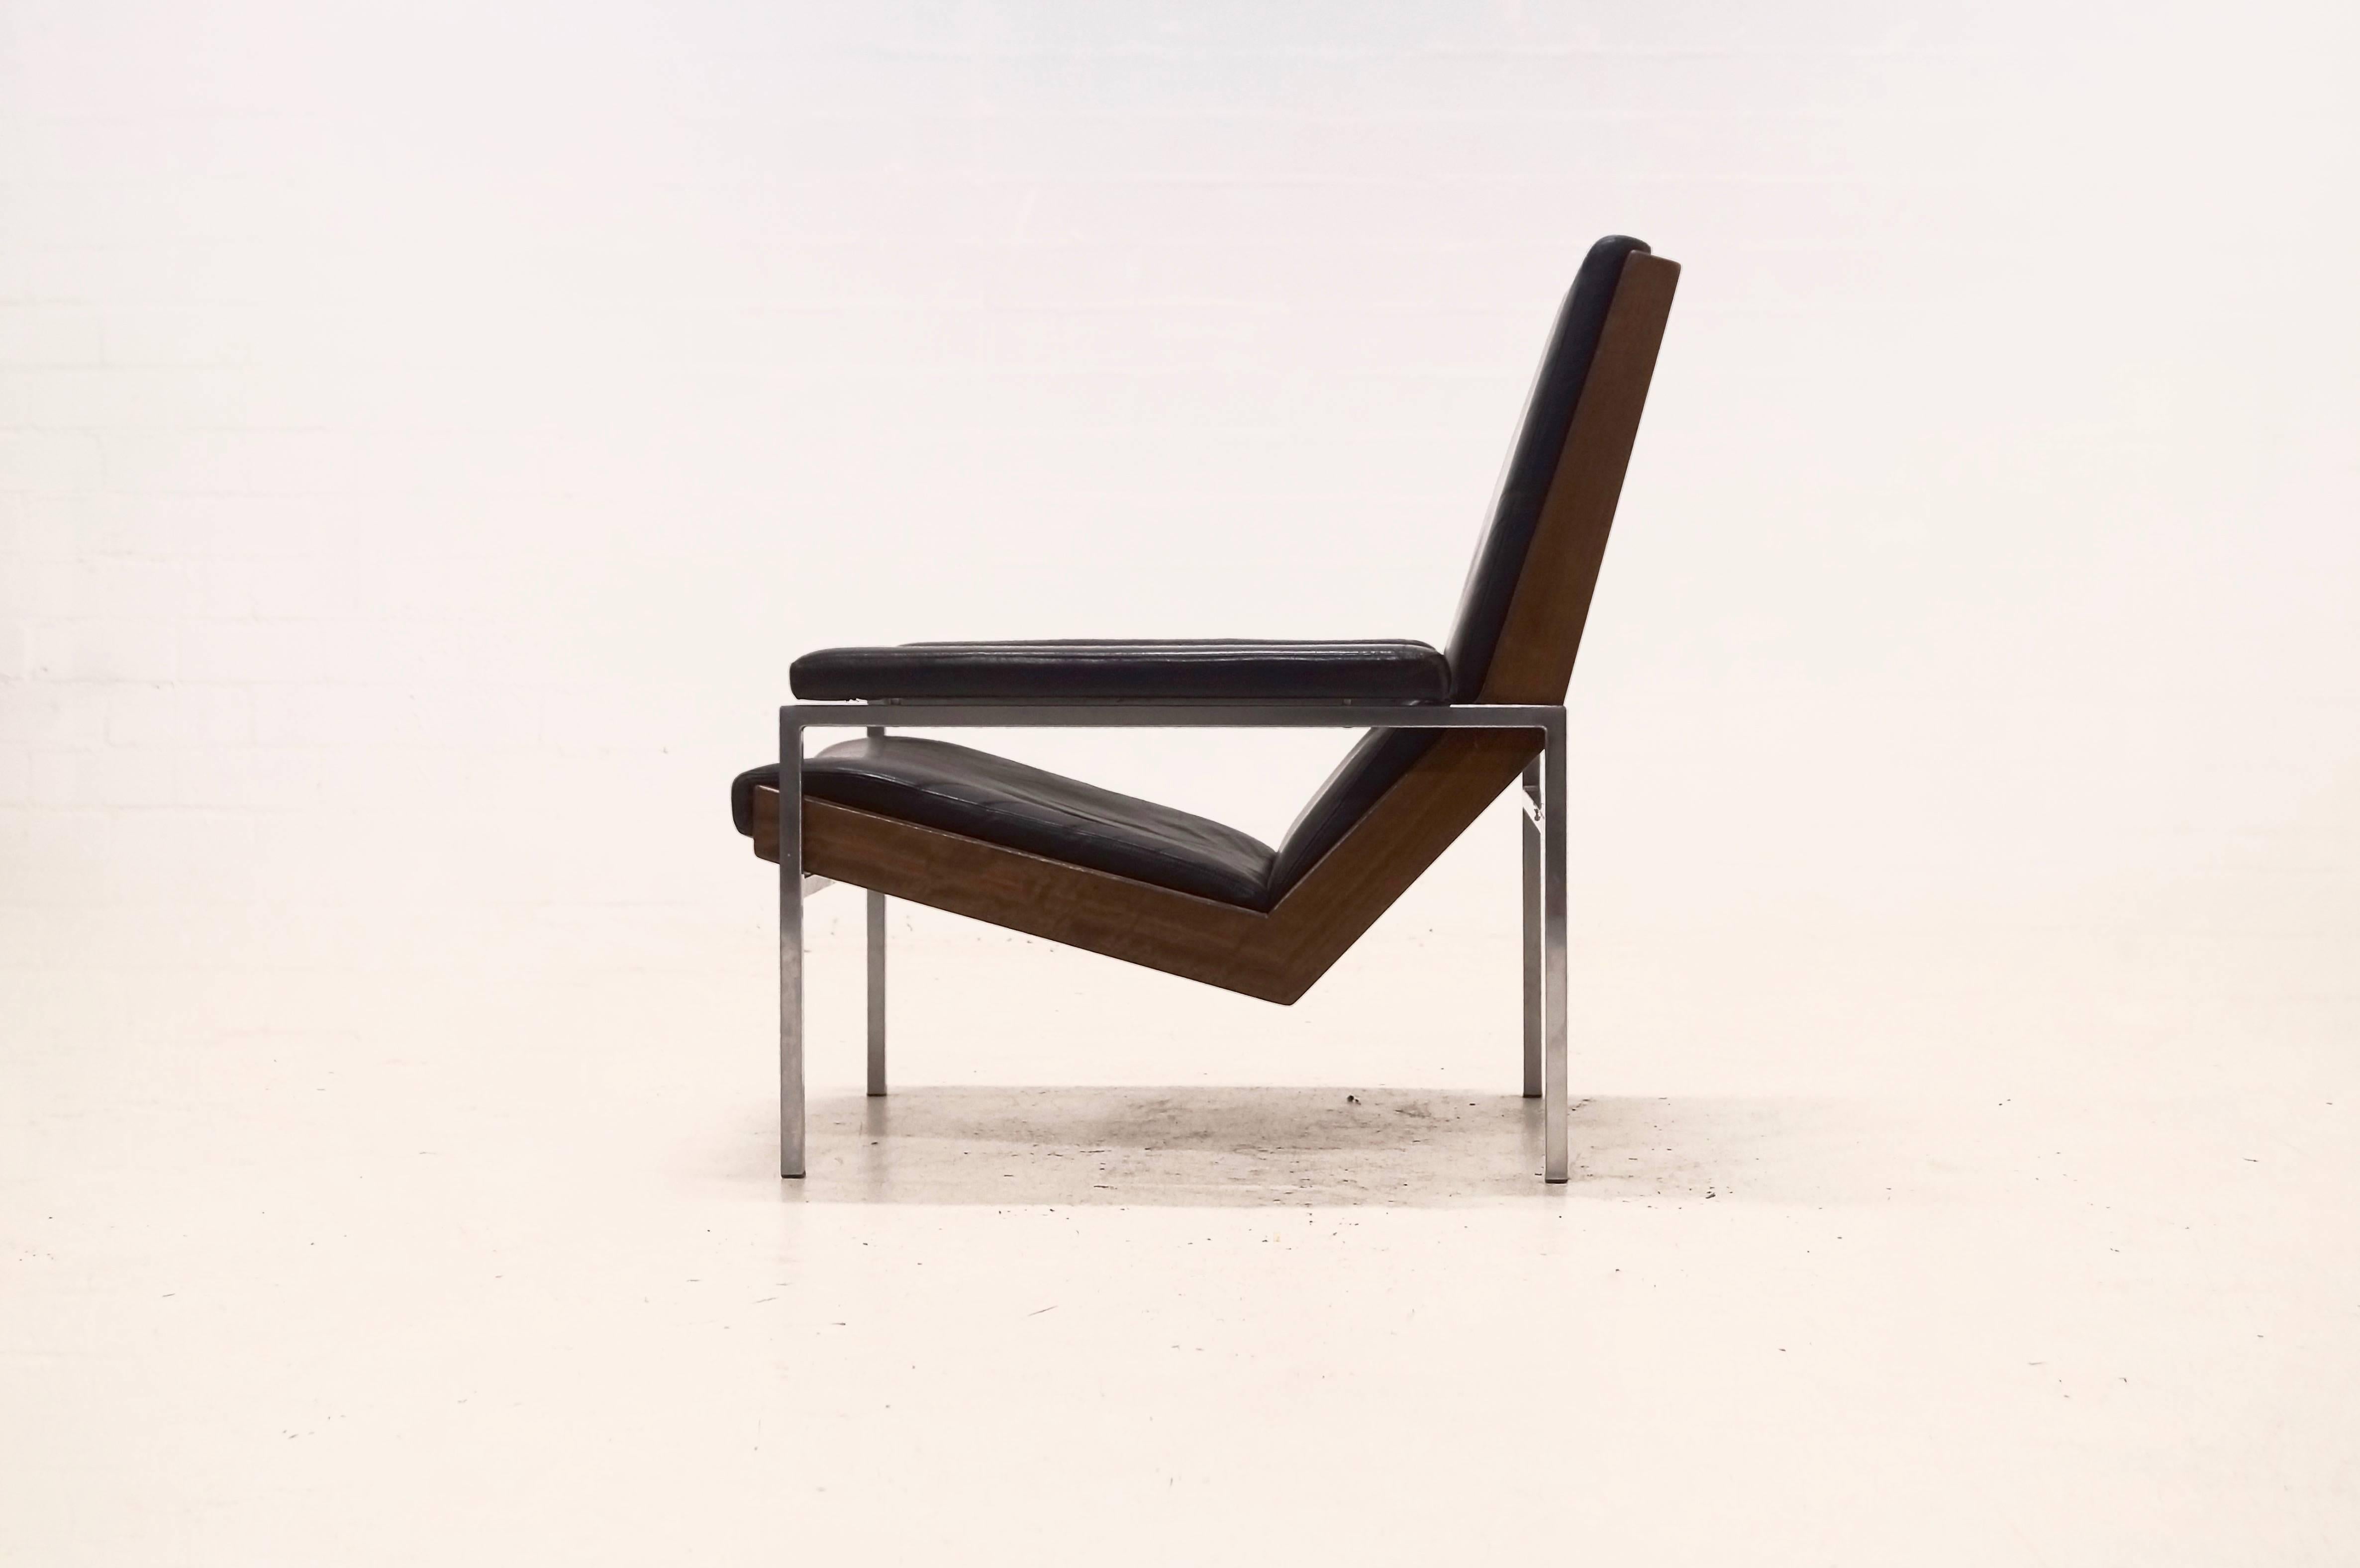 Mid-Century 'Lotus' lounge chair designed by Rob Parry and produced by Gelderland Holland. The chair has a chromed metal frame combined with teak and is upholstered with beautiful black leather. The leather on one of the armrests has some patina as